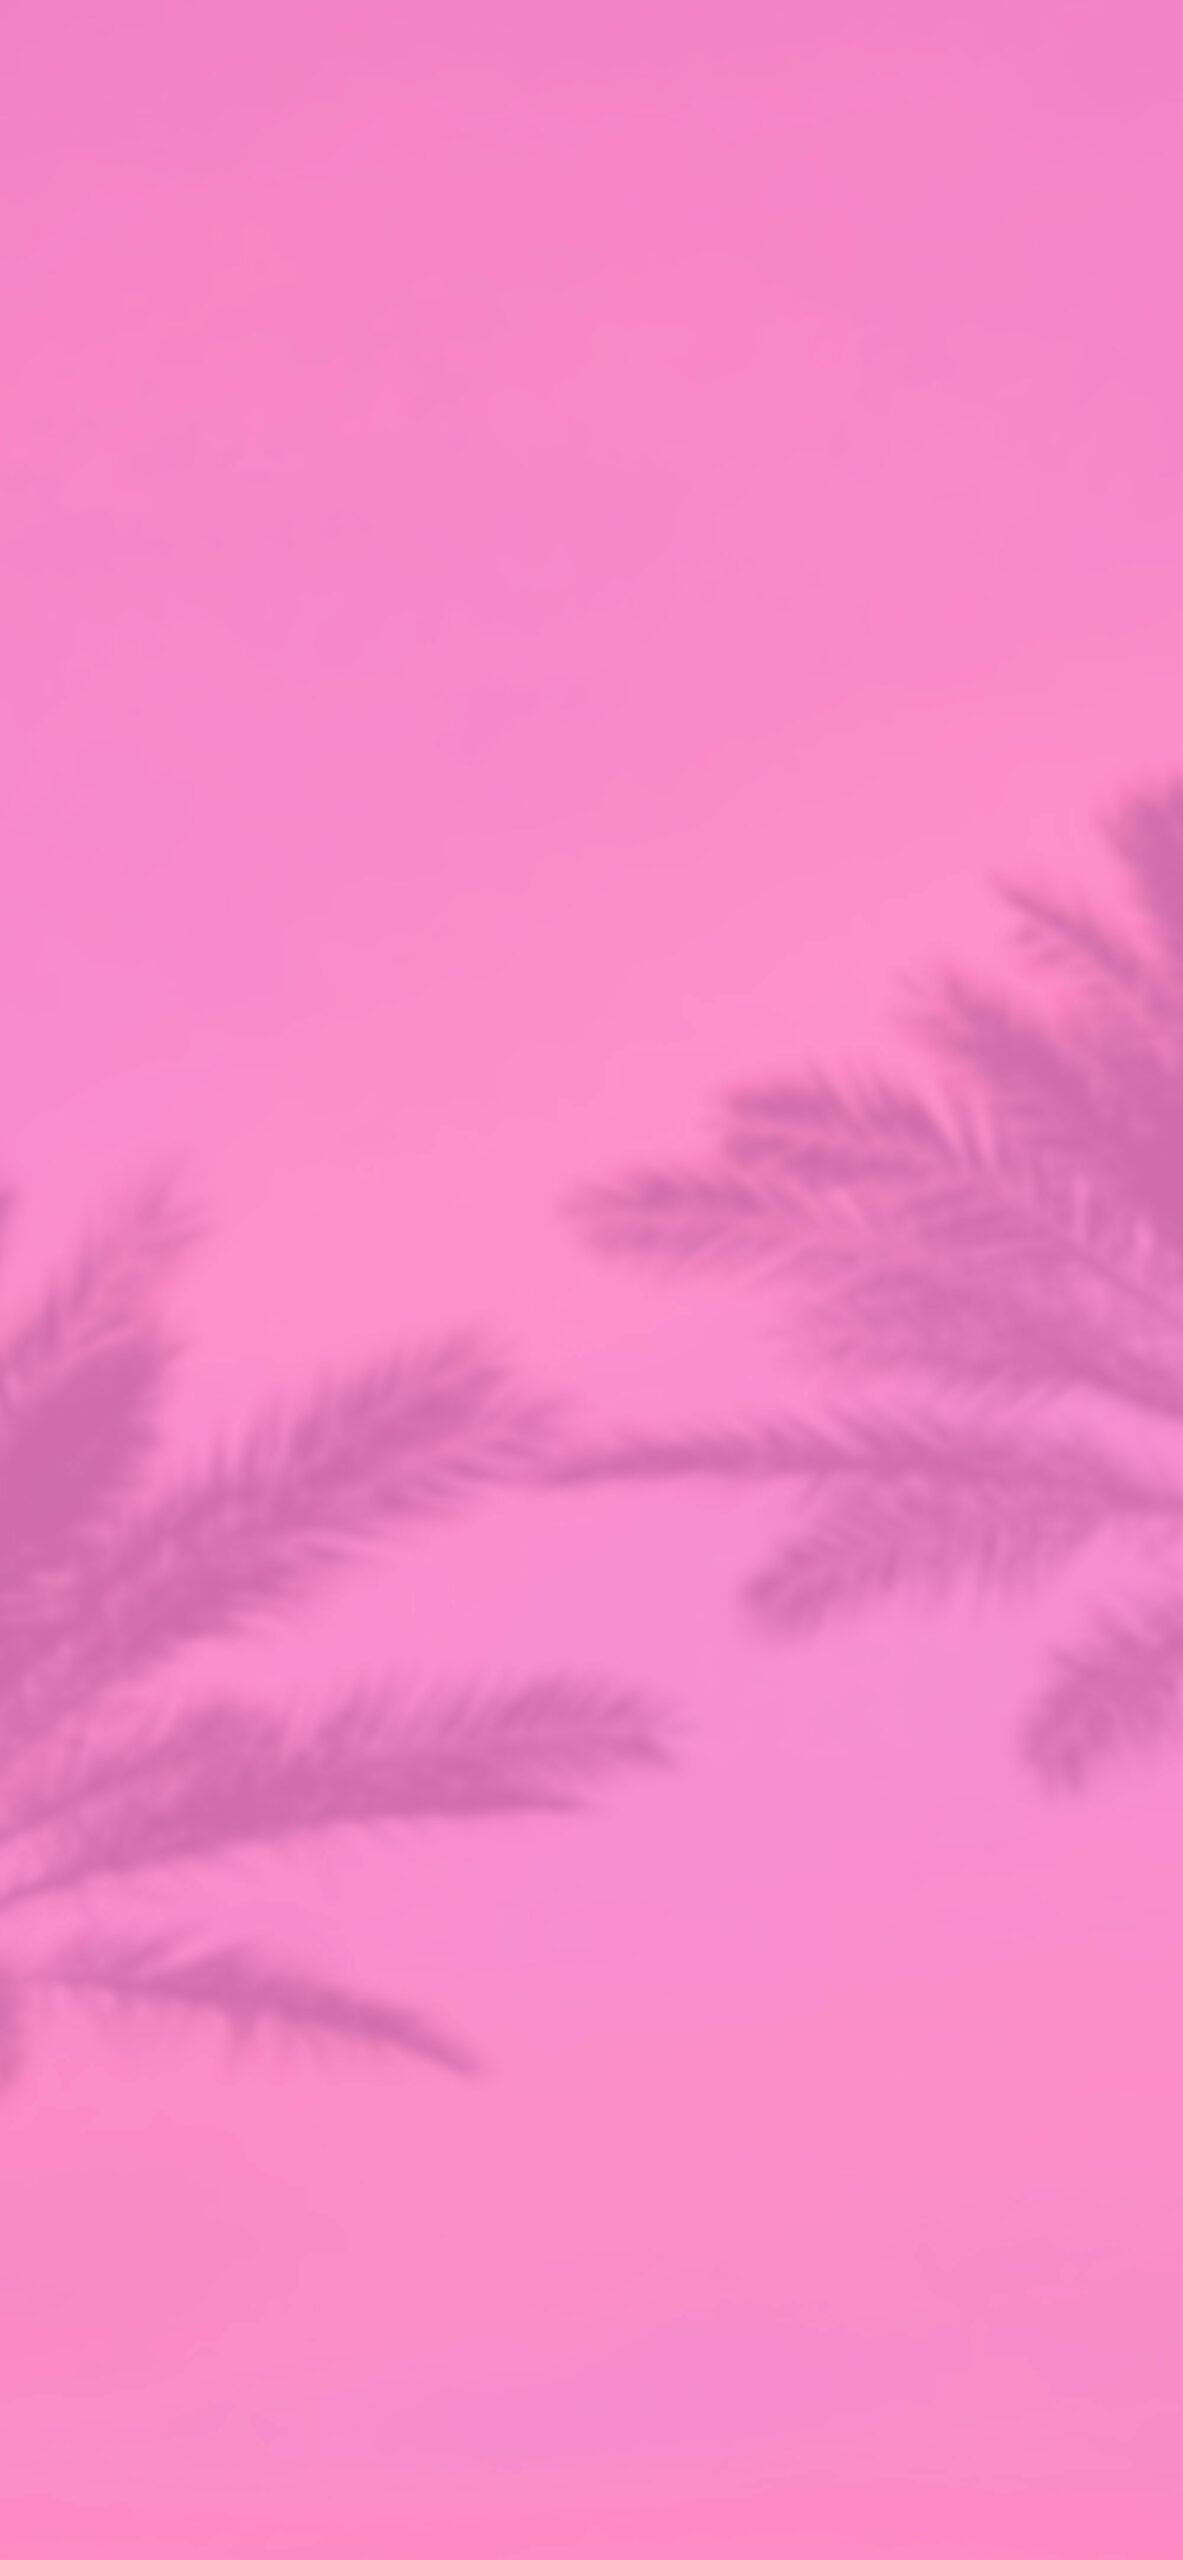 pink background aesthetic